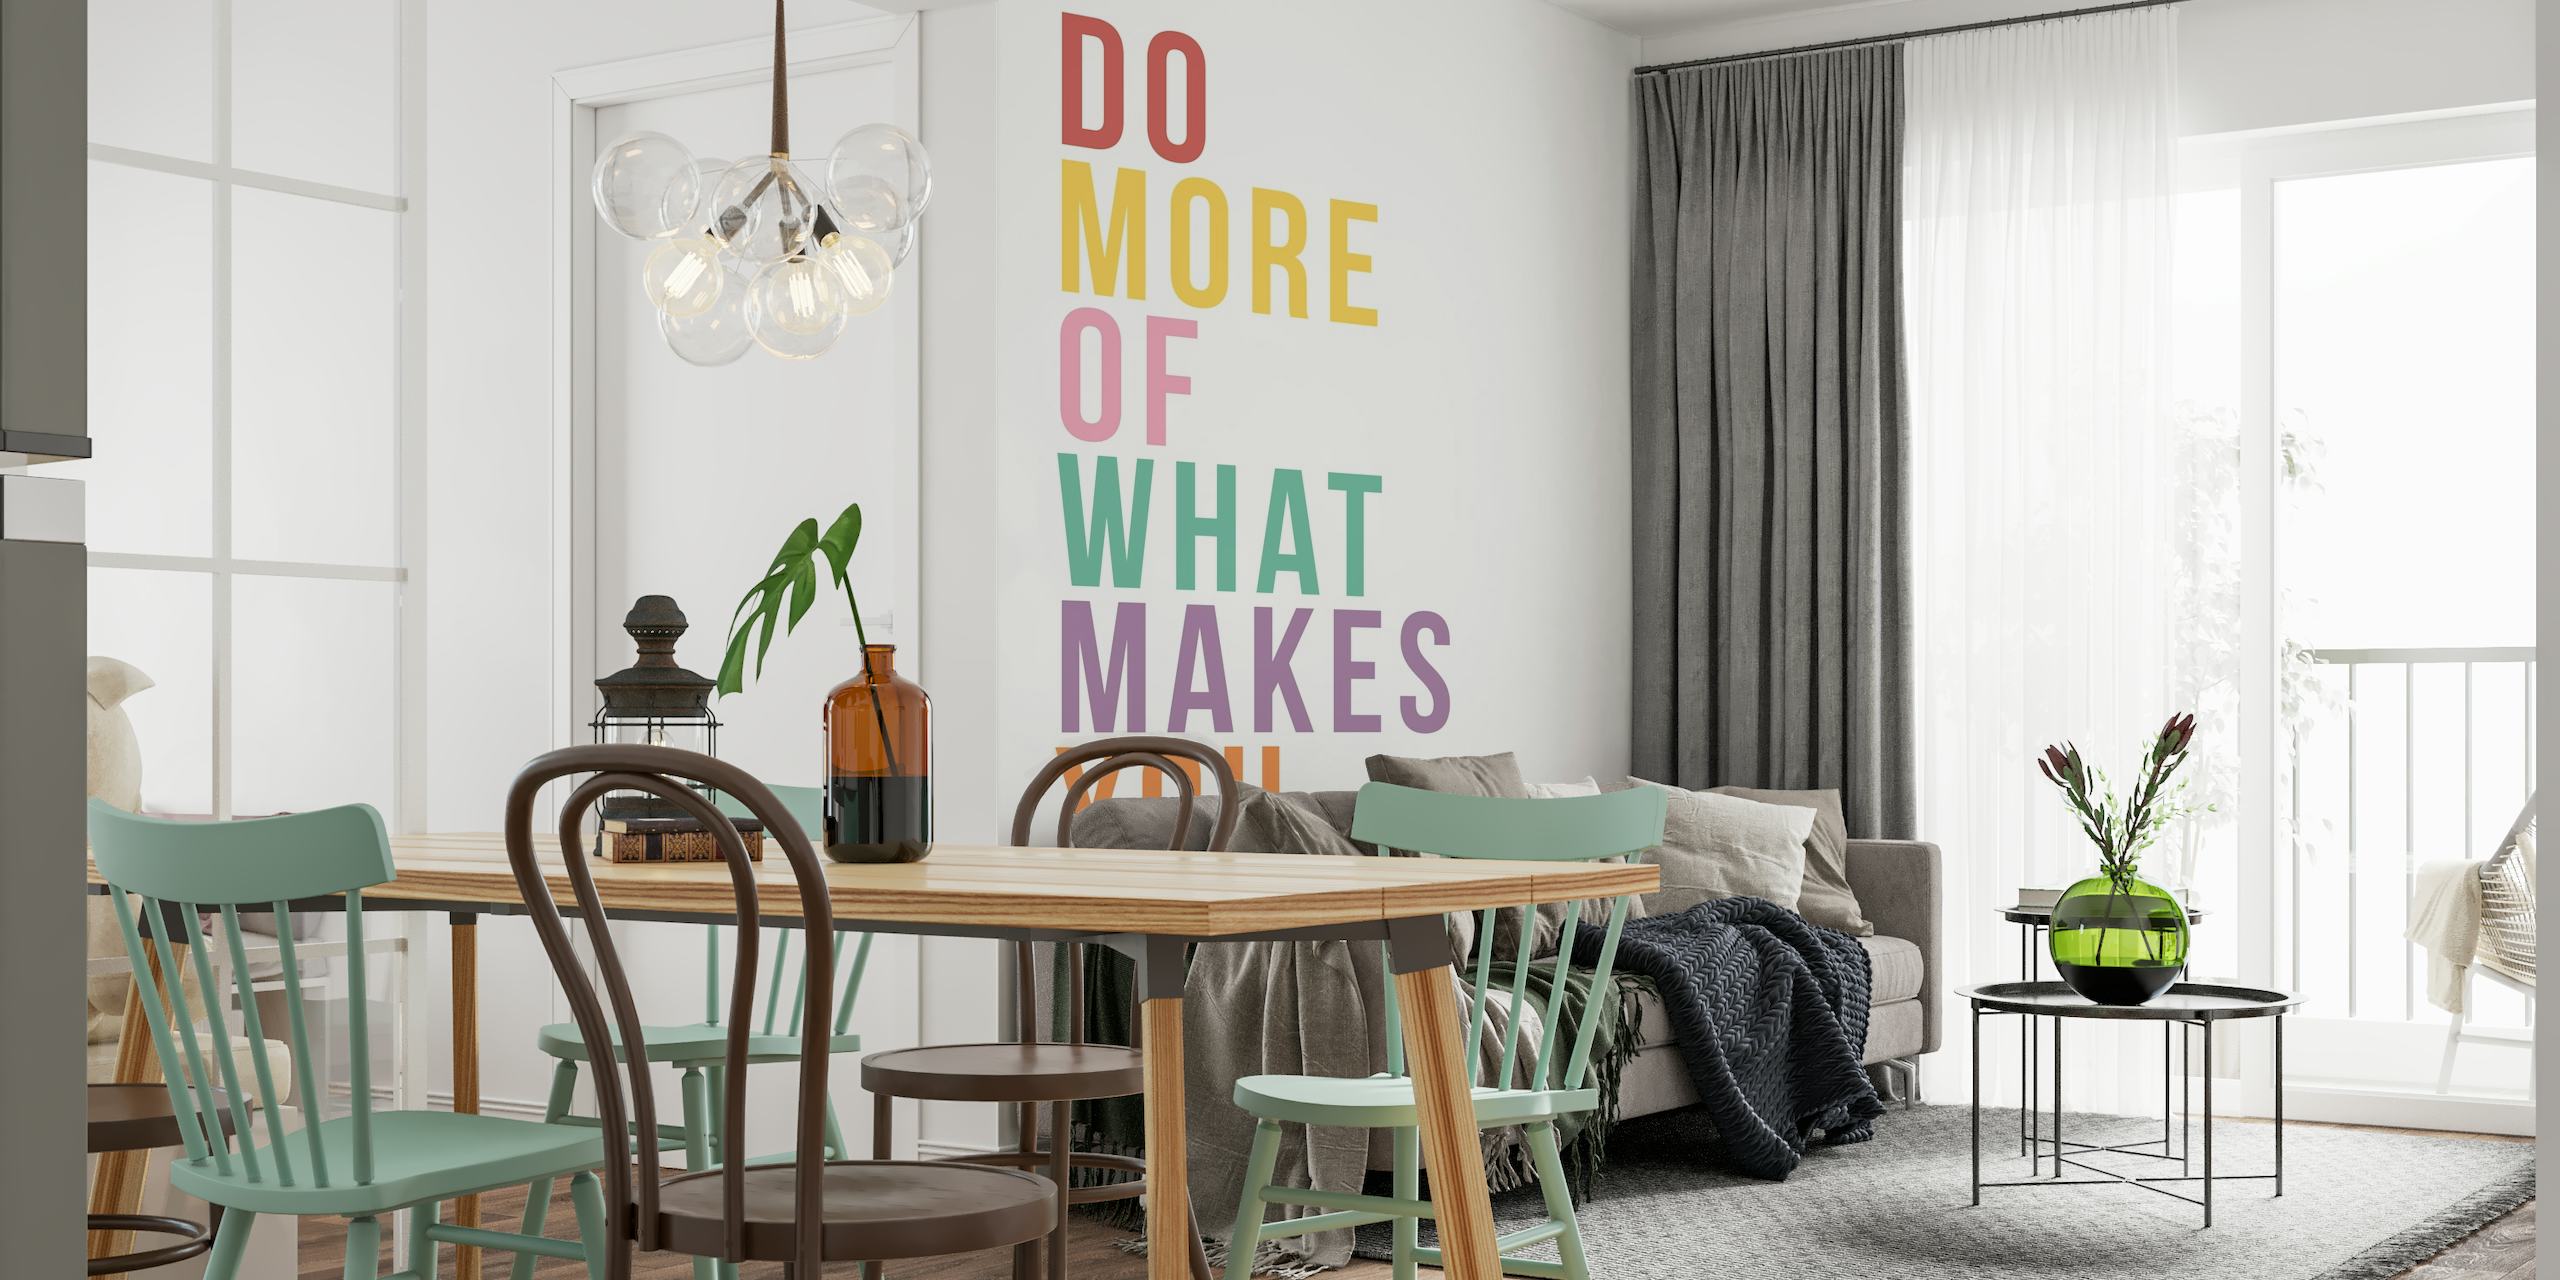 Do More Of What Makes You Happy wallpaper